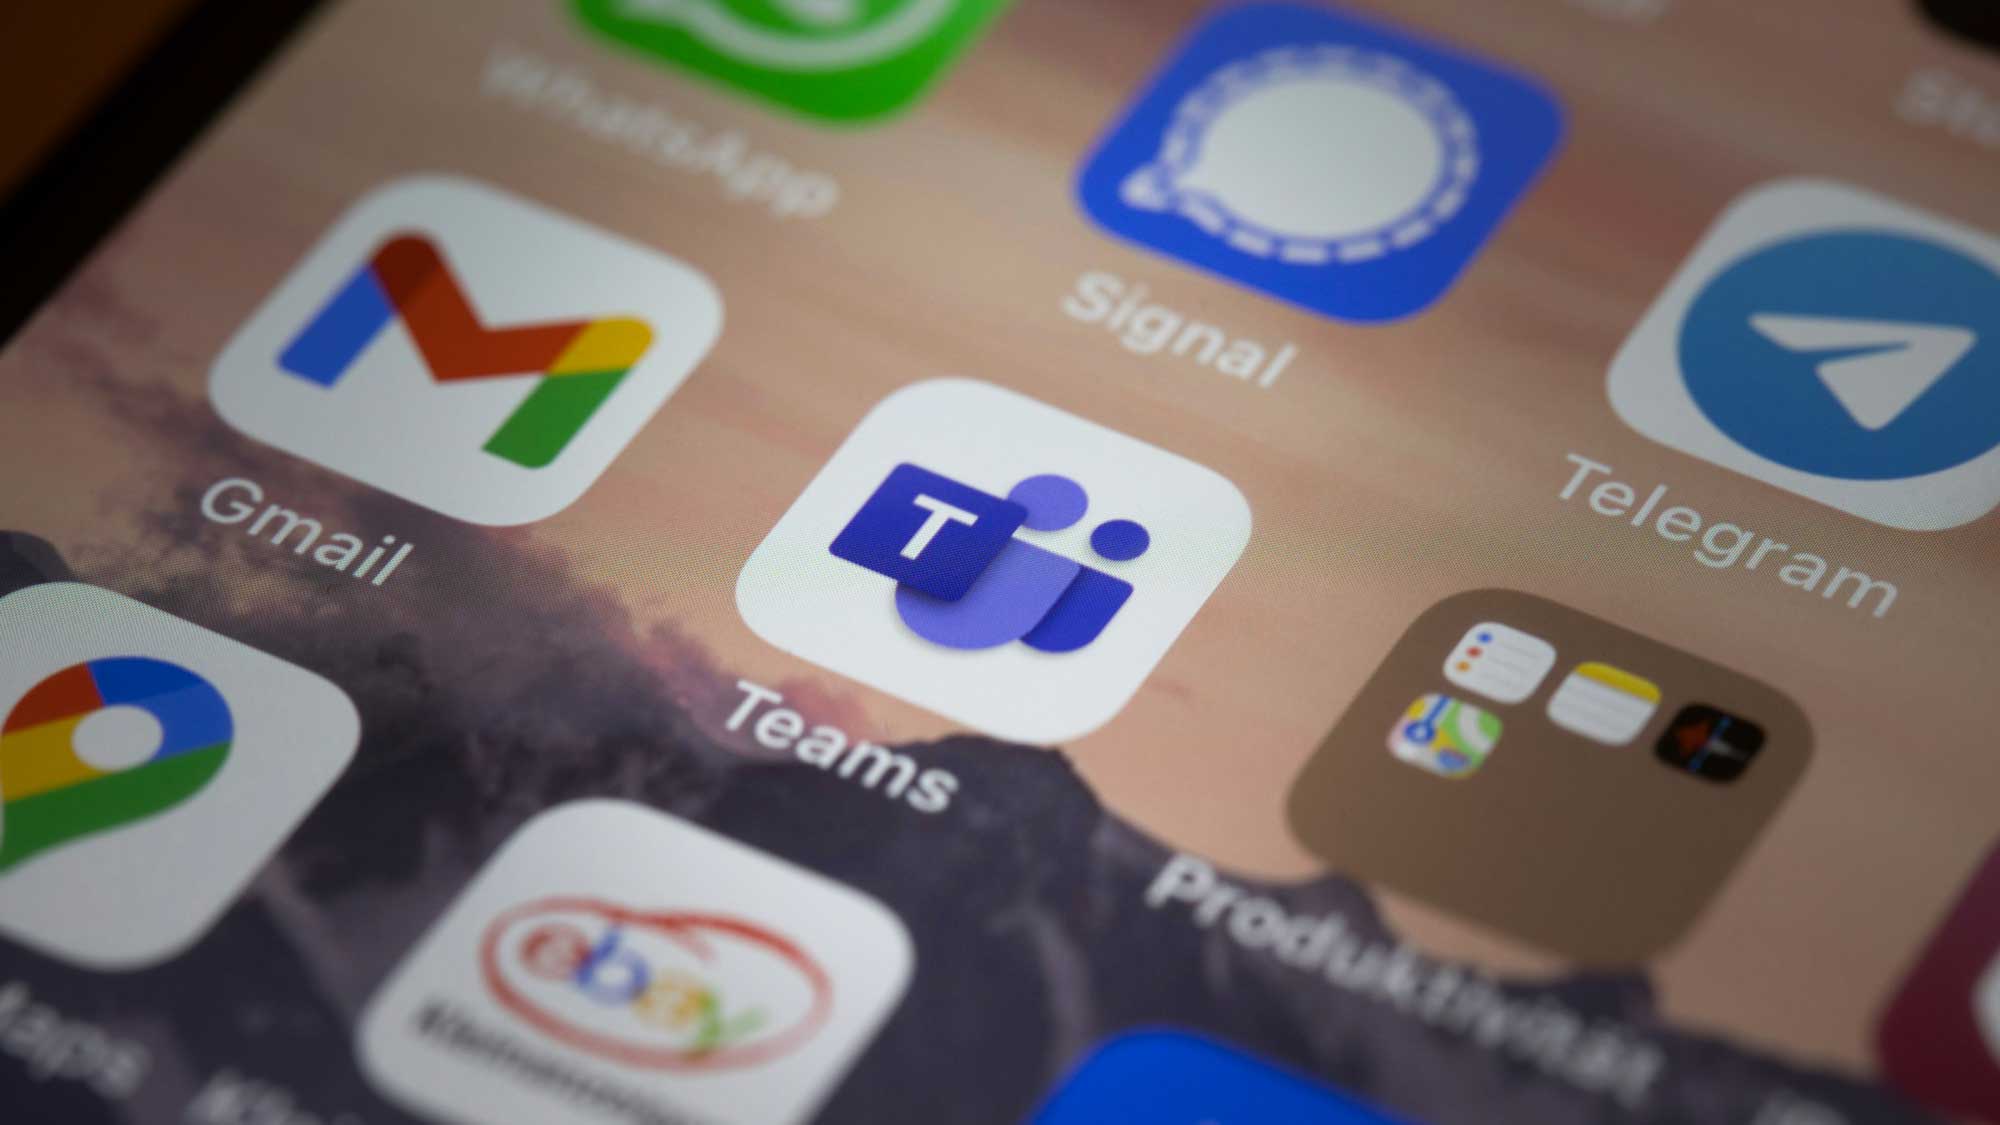 Microsoft Teams Unifies Personal and Work Accounts in New App